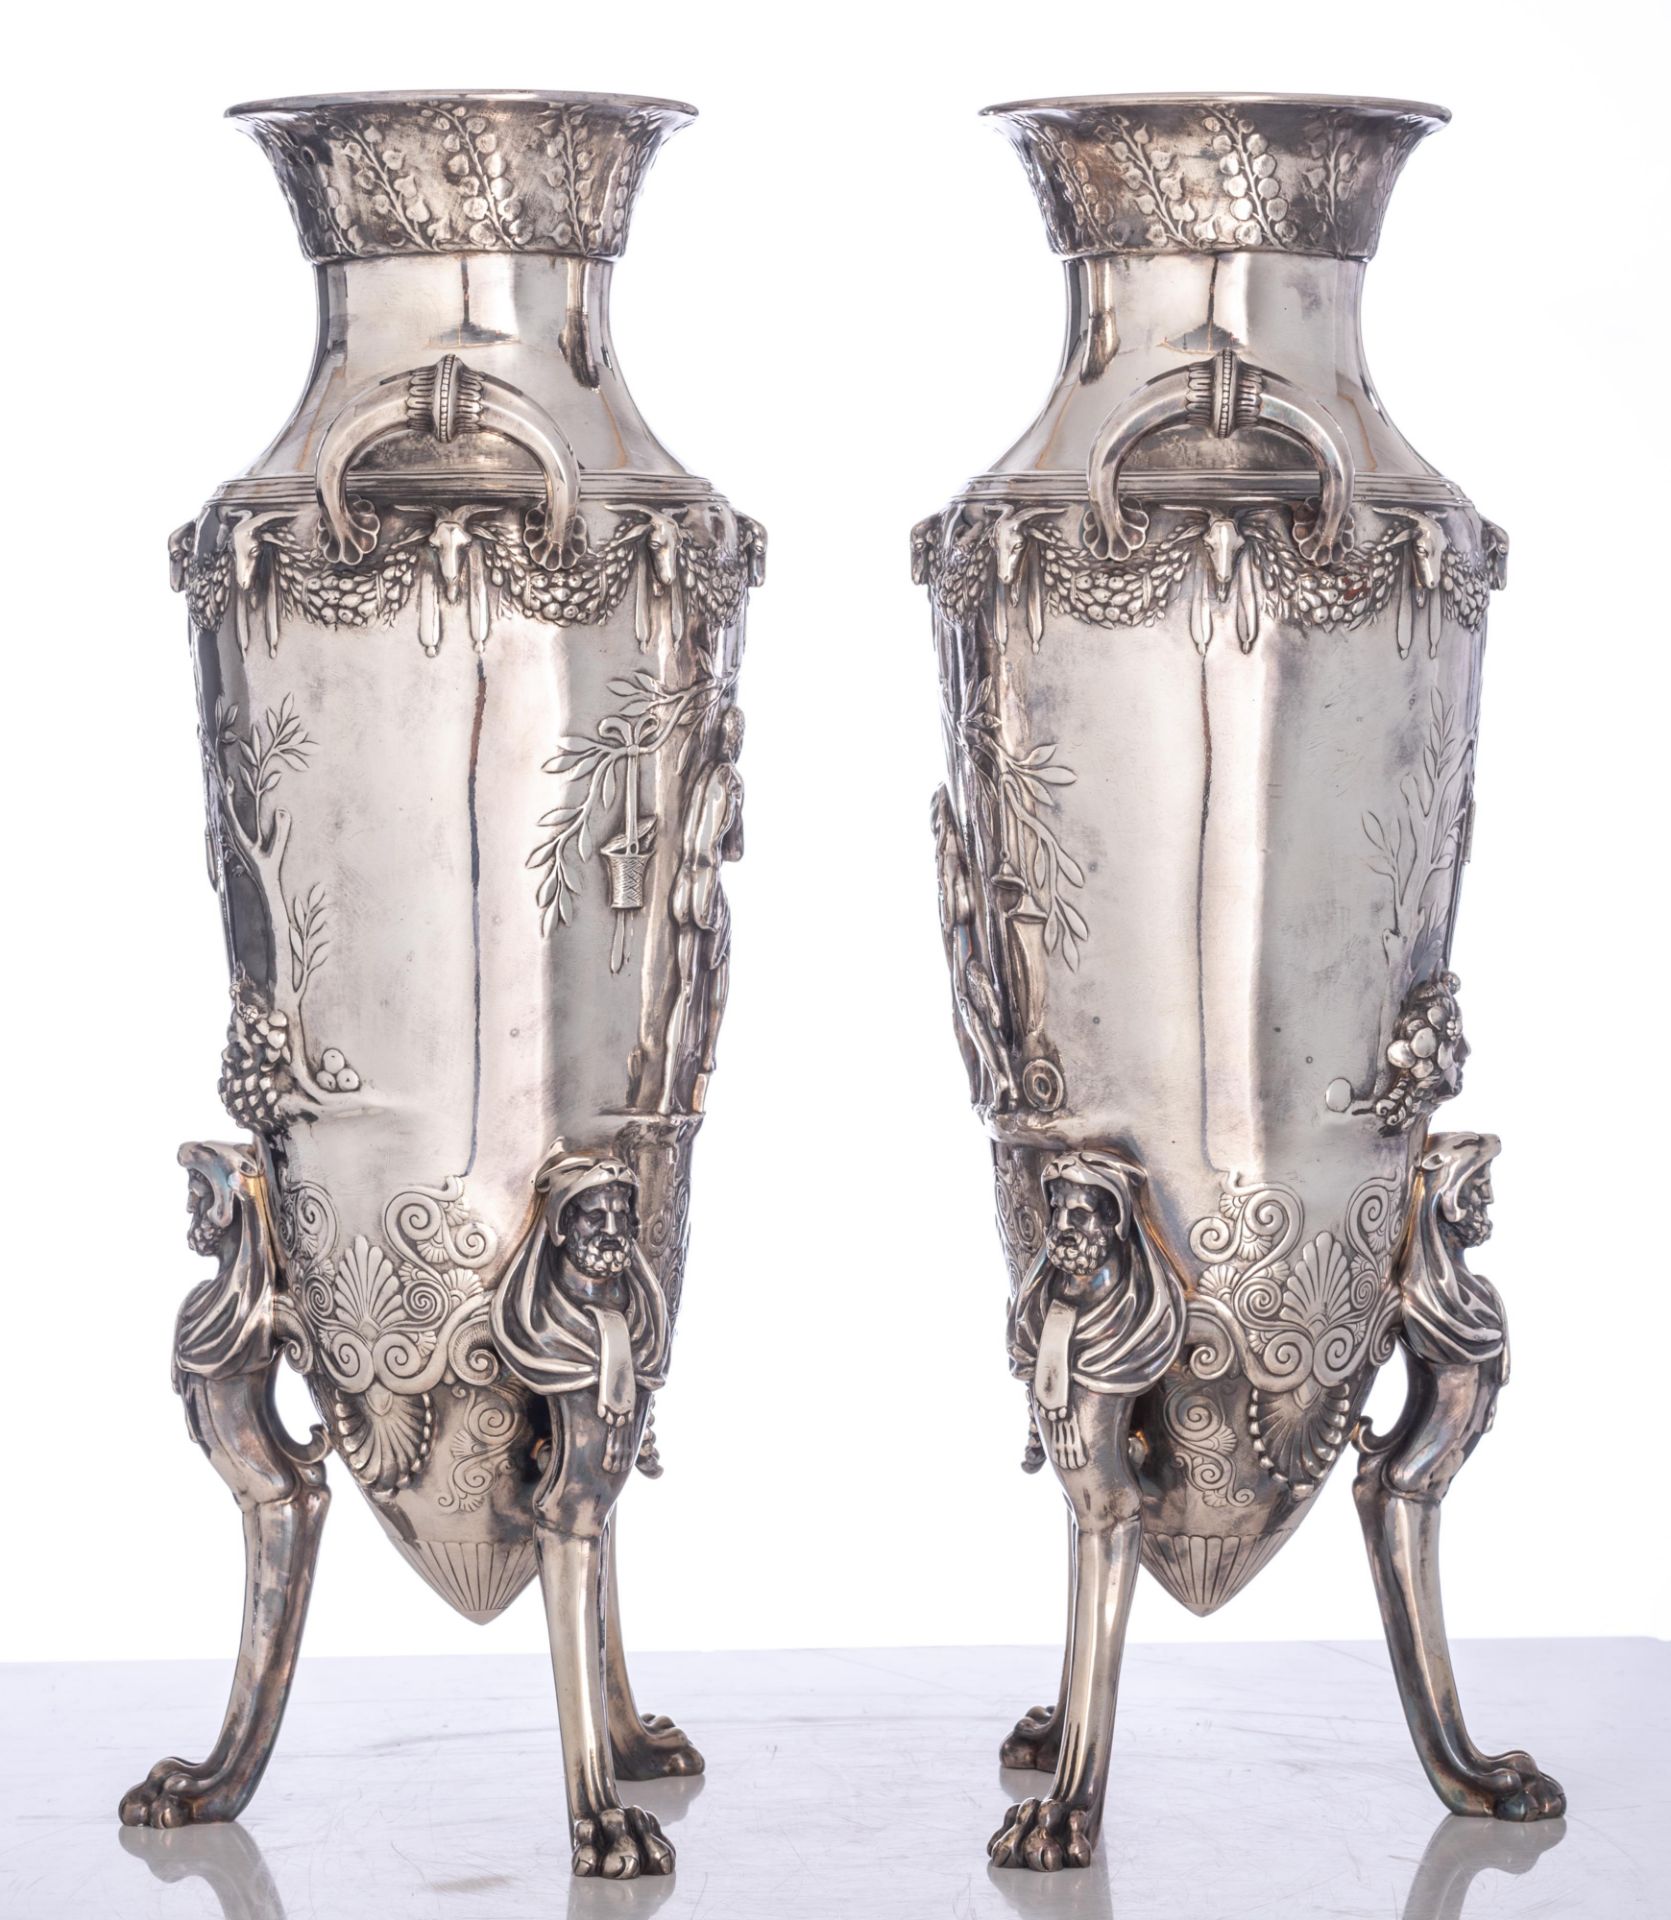 A pair of Greek-inspired silvered bronze amphora vases with classical-inspired decoration, F. Barbed - Image 2 of 14